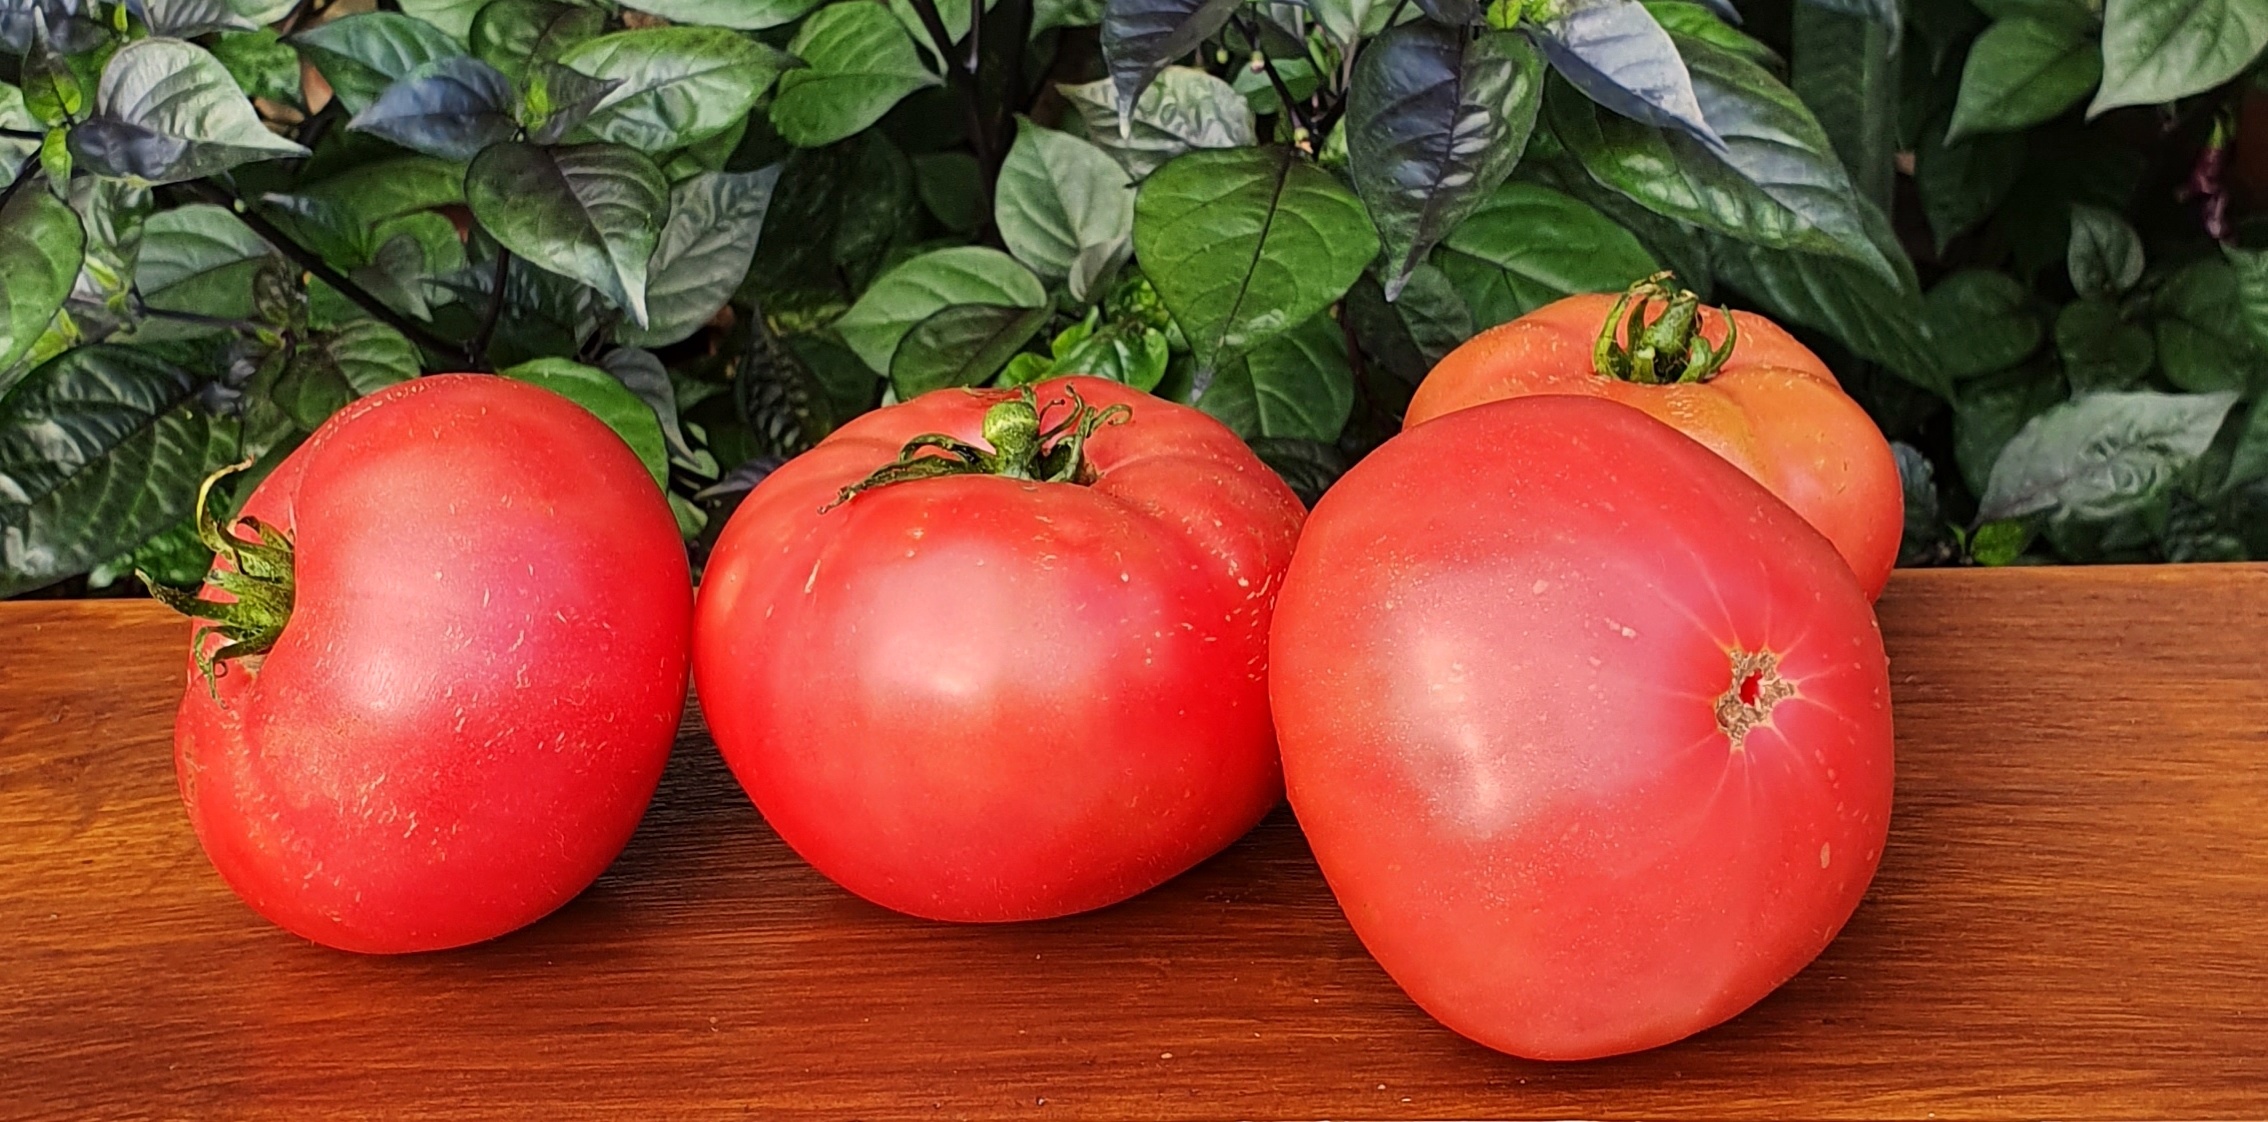 Tomato (Slicer): Wood's Famous Brimmer Tomato (20 or 100 seeds